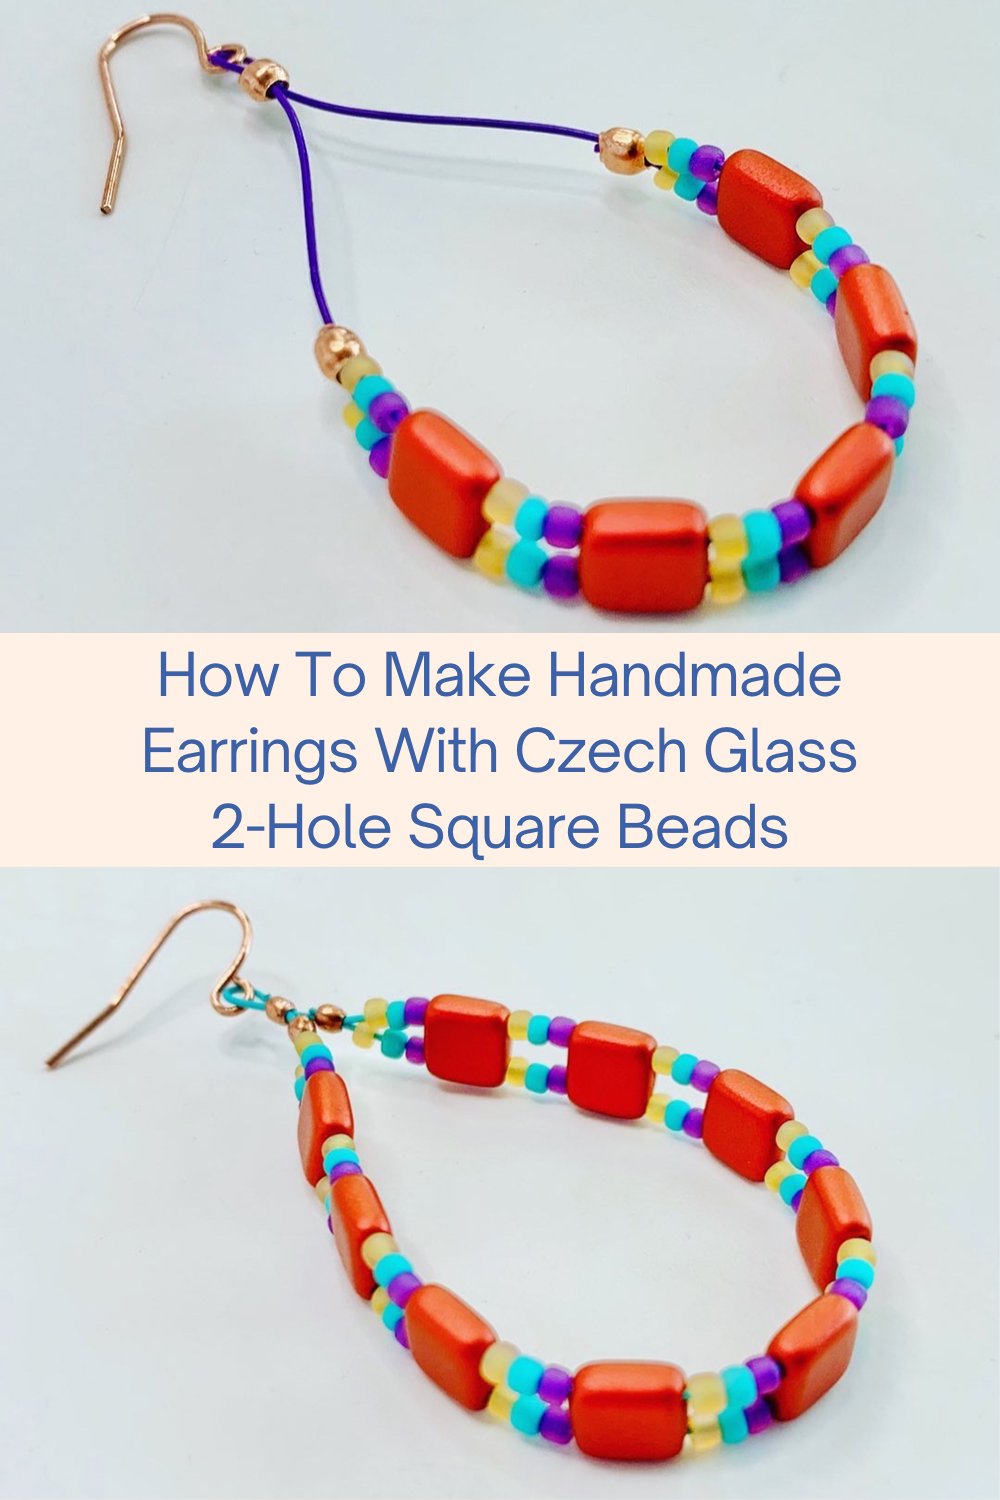 How To Make Handmade Earrings With Czech Glass 2-Hole Square Beads Collage